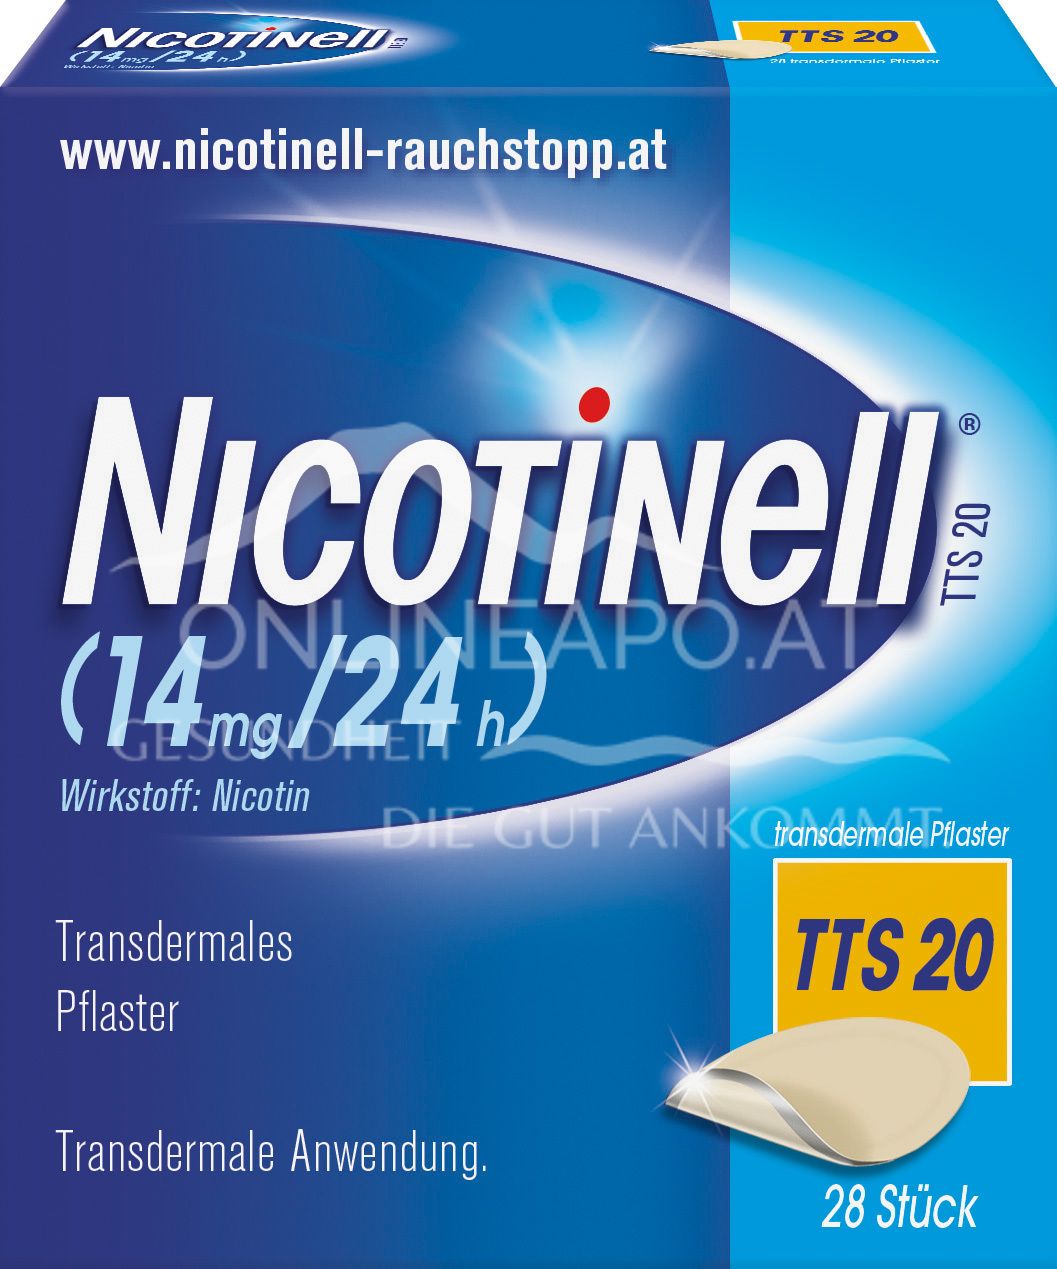 Nicotinell® TTS 20 (14 mg/24 h) transdermale Pflaster